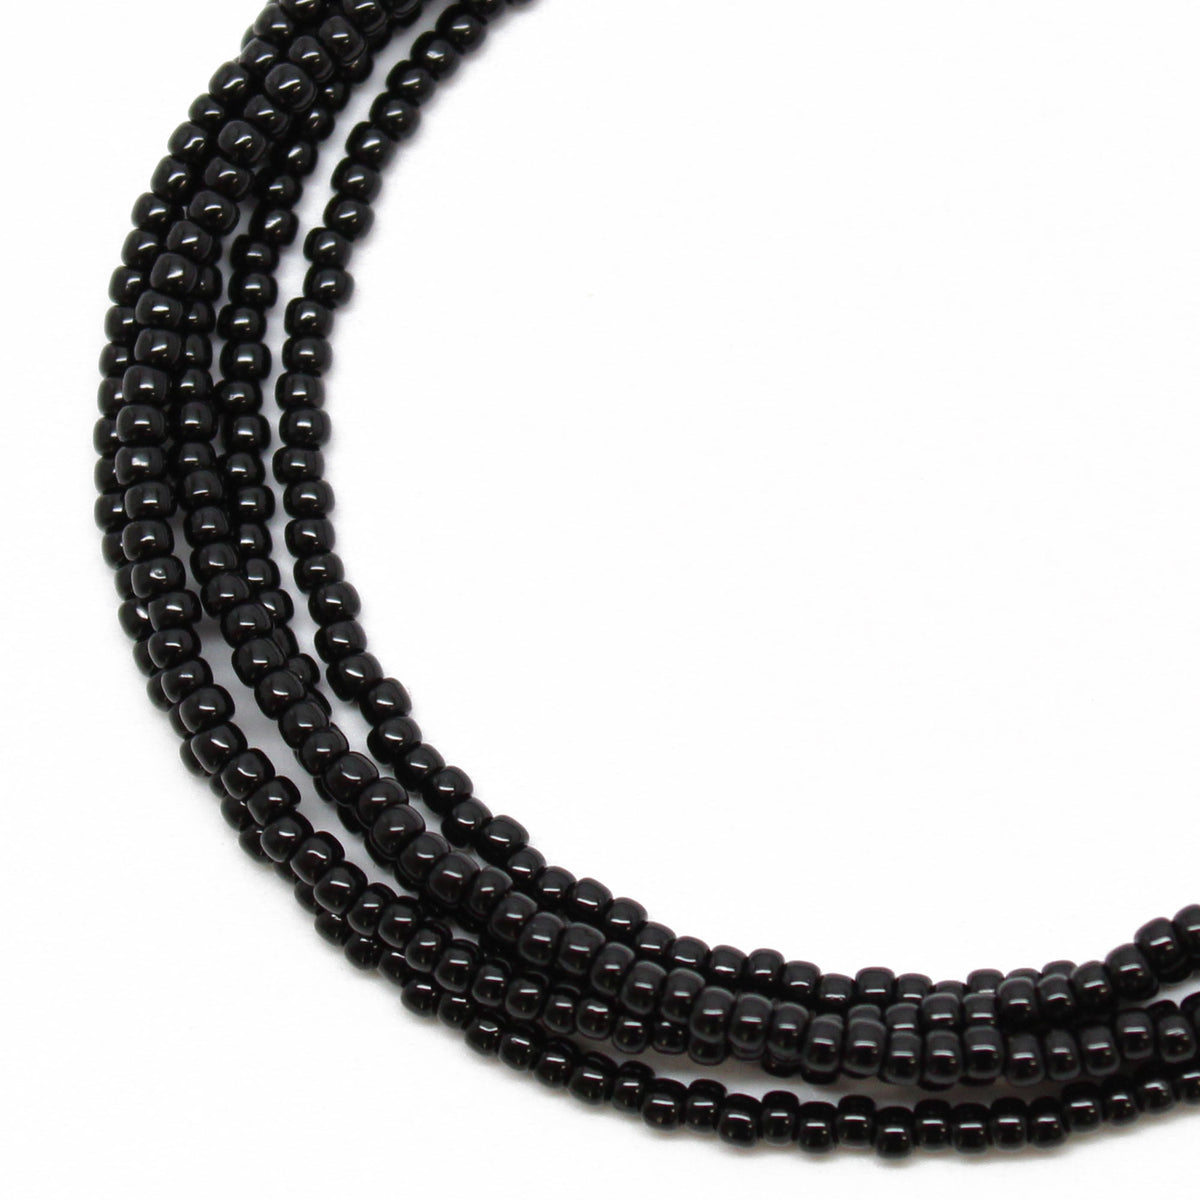 Black Seed Bead Necklace Choose Your Shade and Size Small 